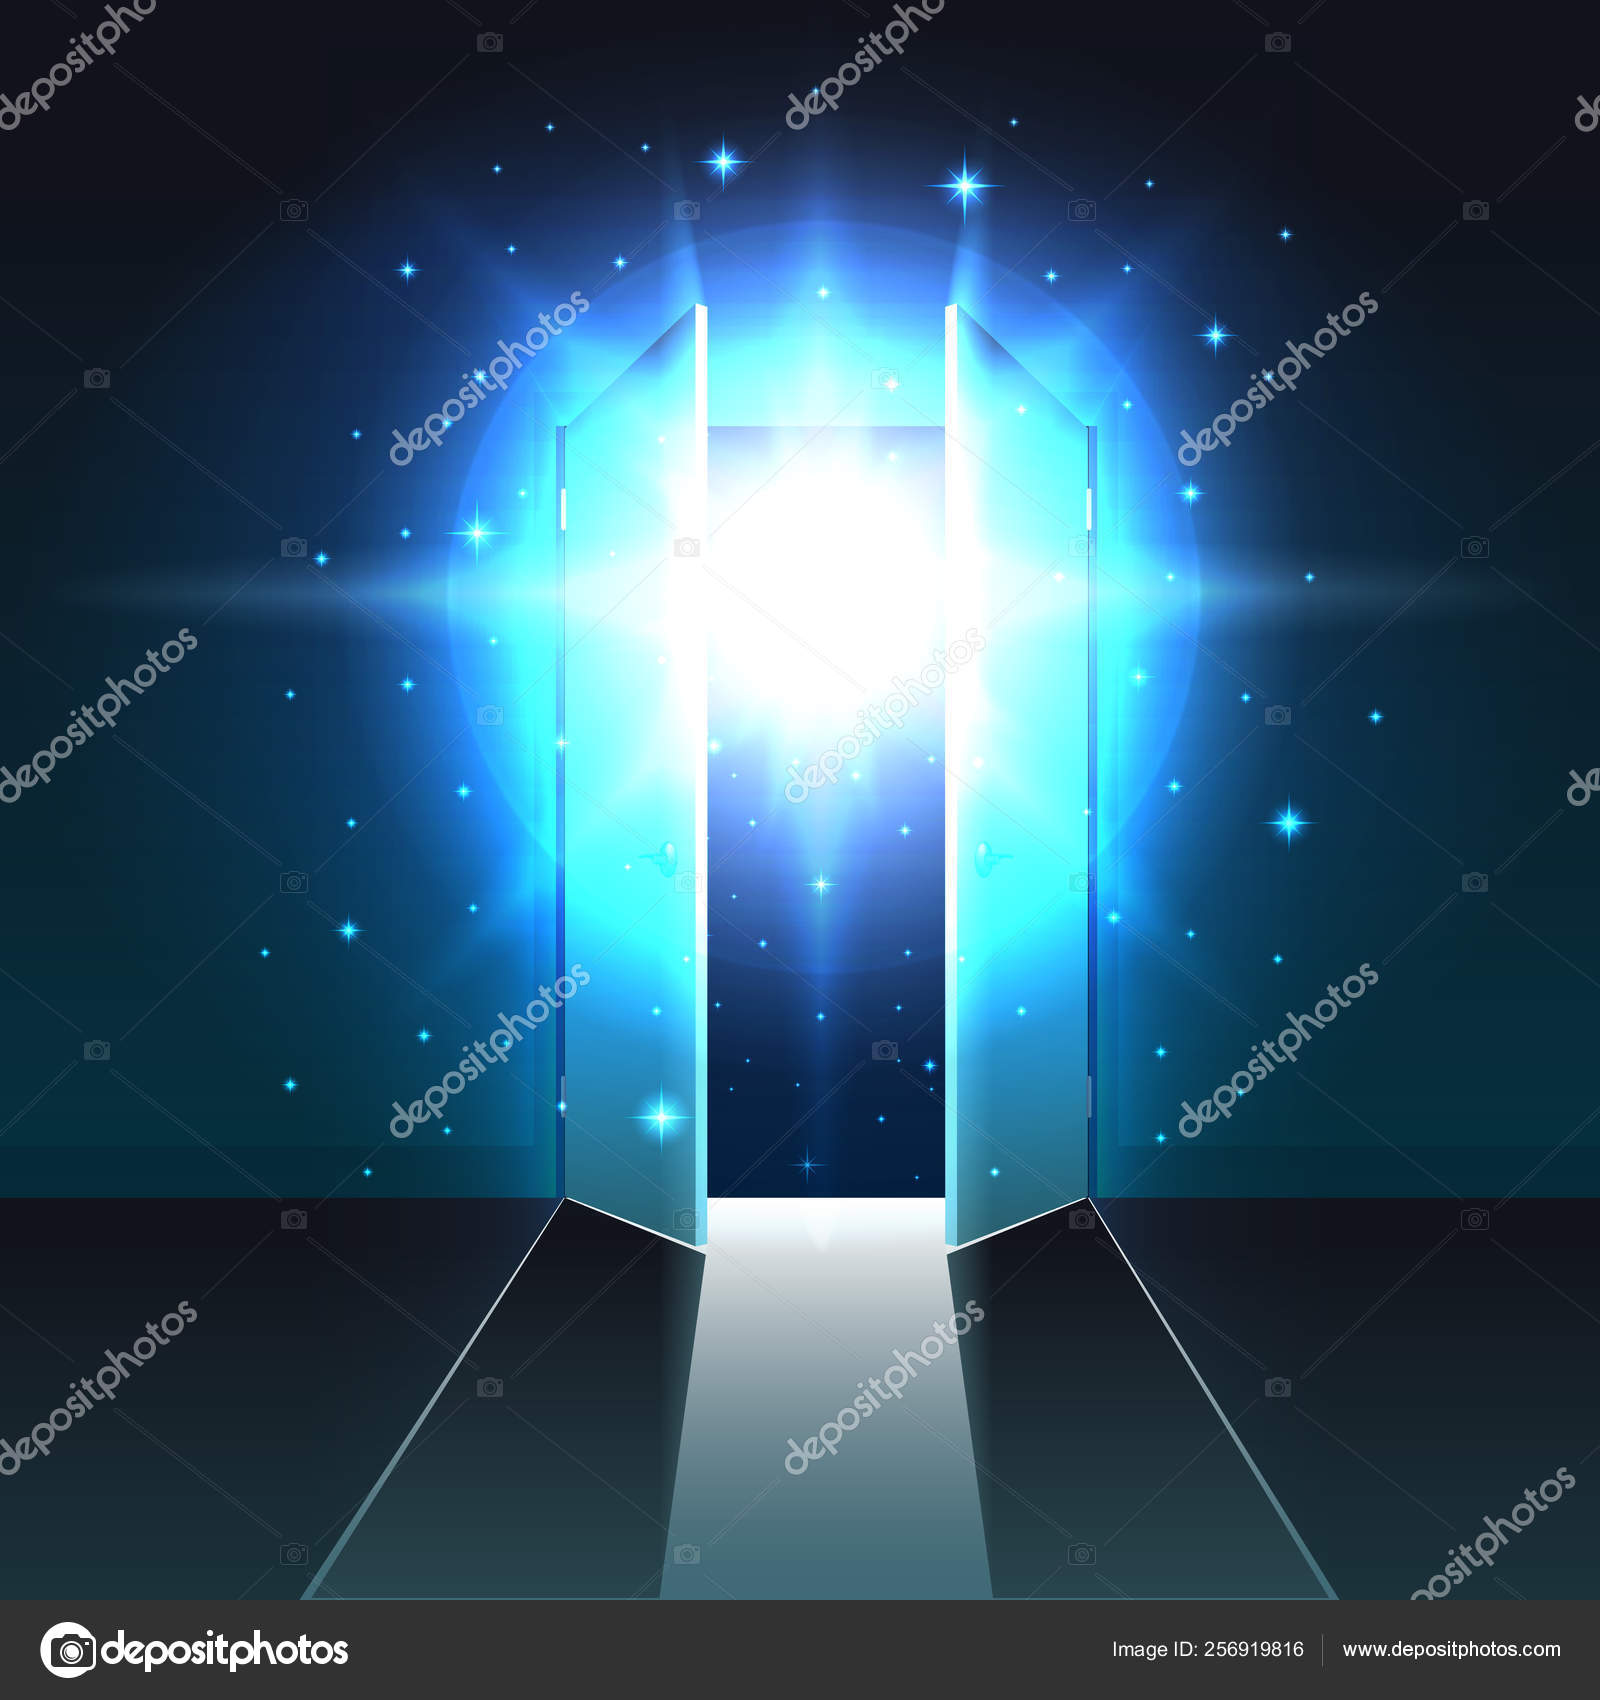 Grand opening illustration, background with open door, light and